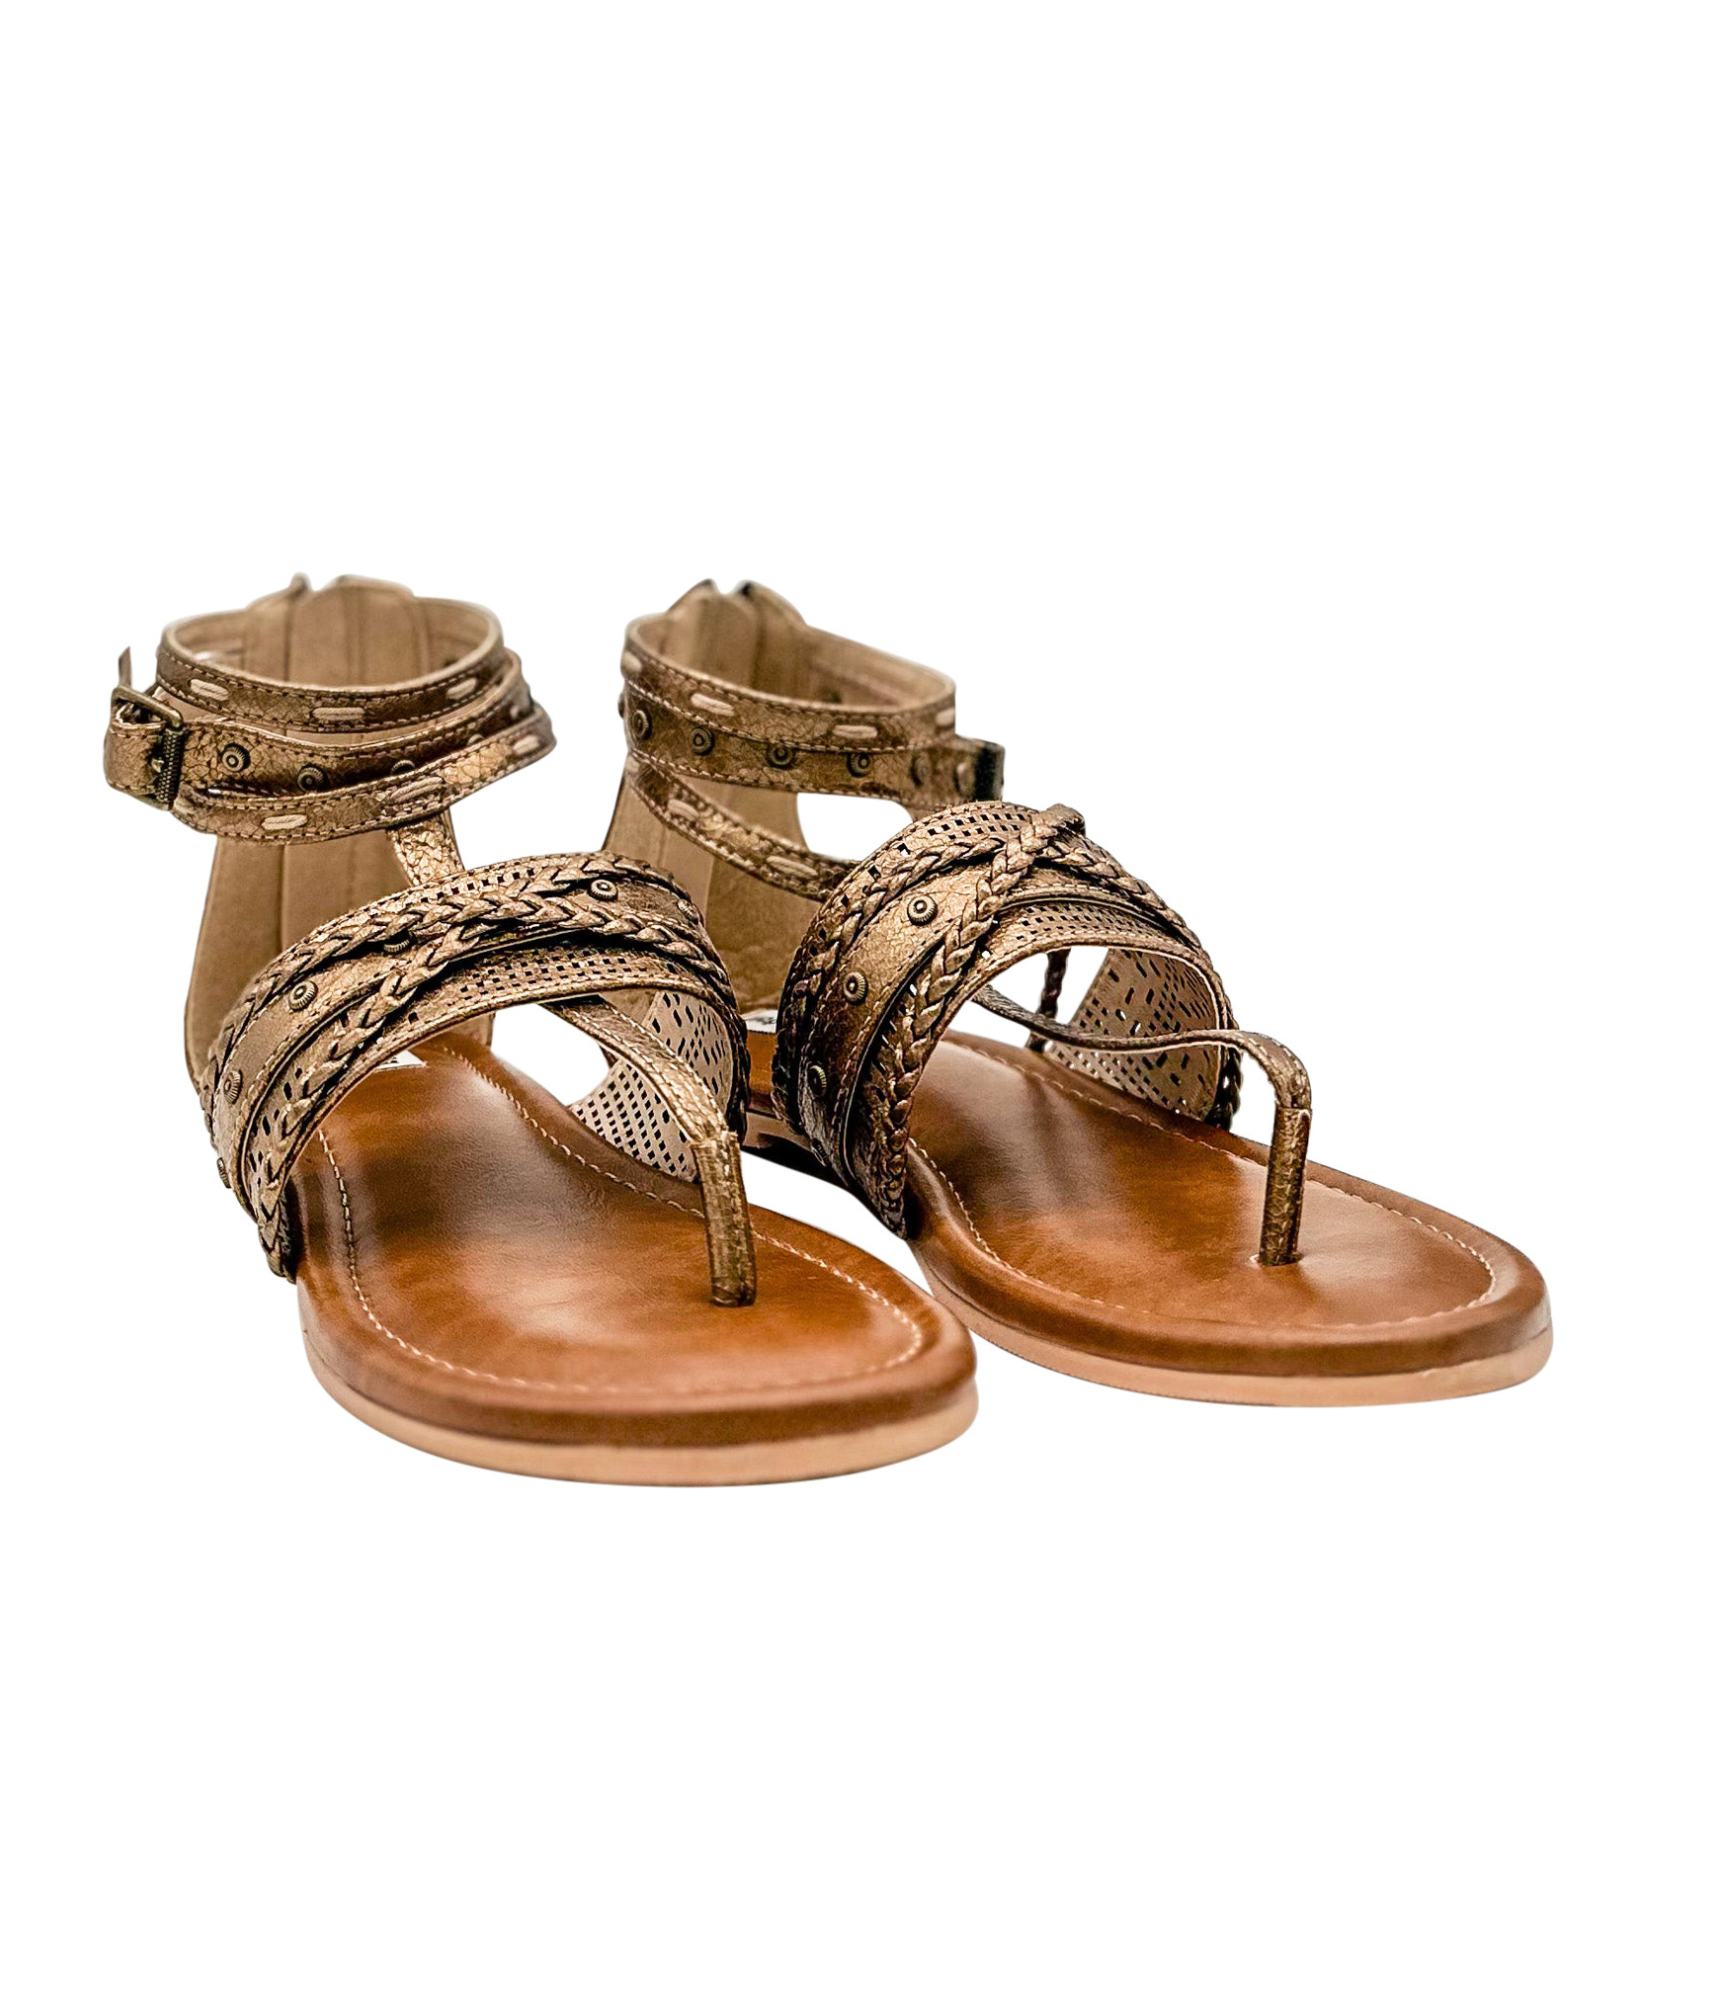 Xylia Sandal in Gold